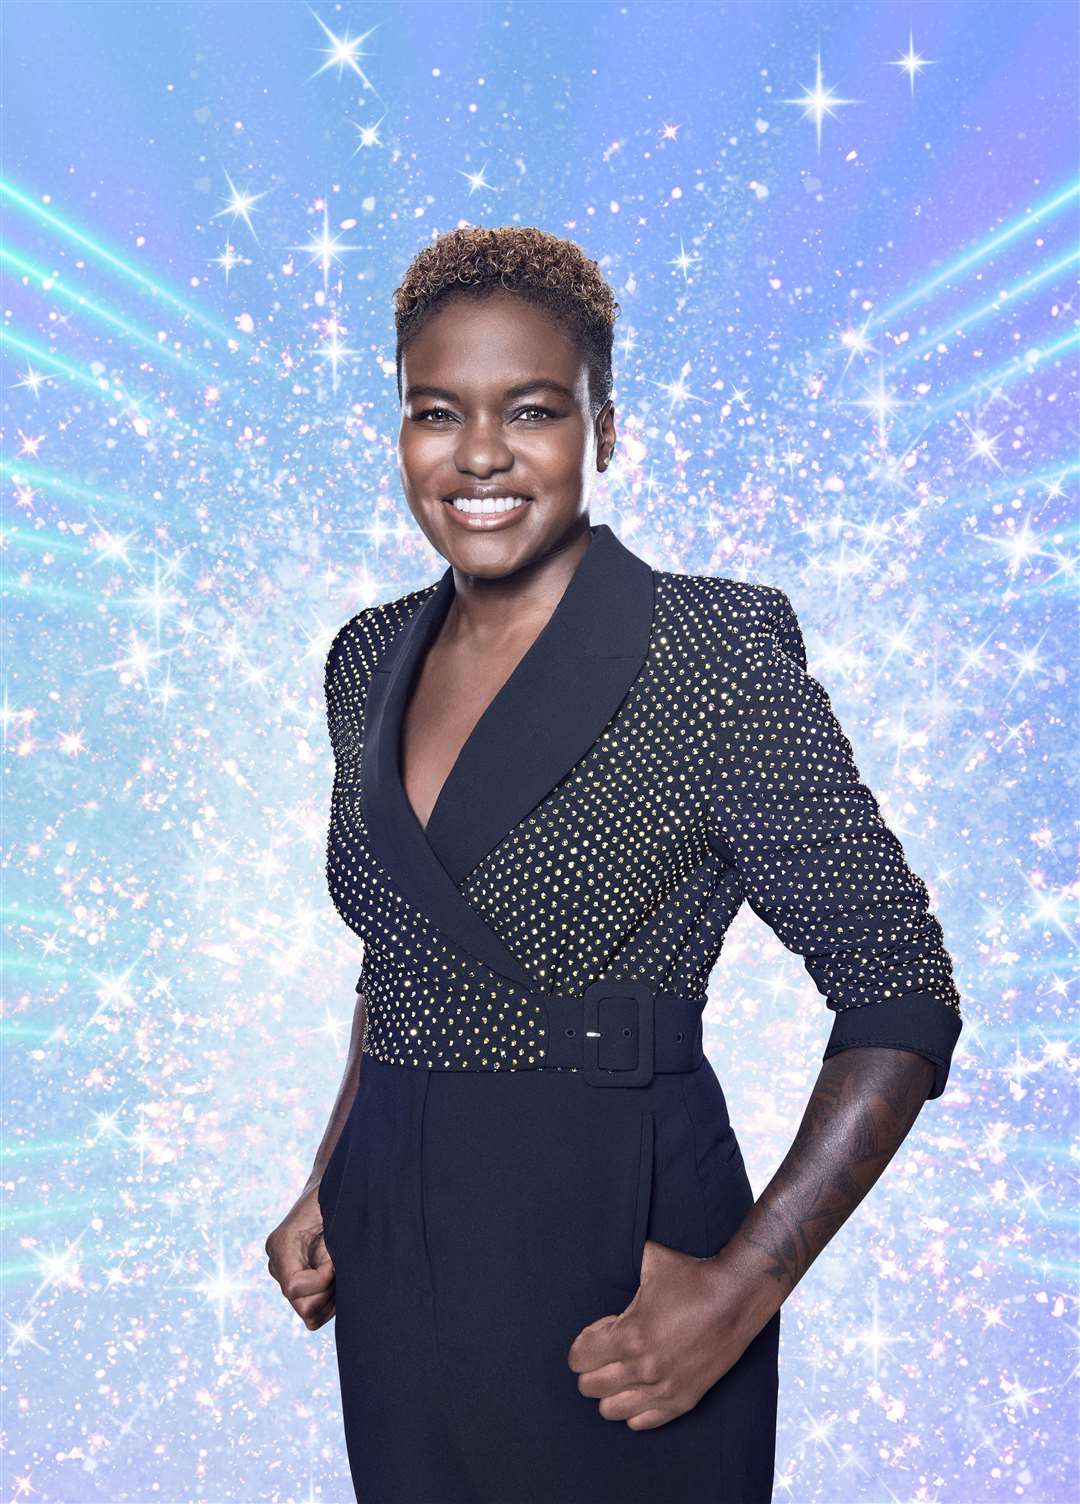 WInkleman welcomed news that Olympic boxer Nicola Adams will be part of the fist same-sex pairing on this year’s Strictly Come Dancing (BBC/PA).